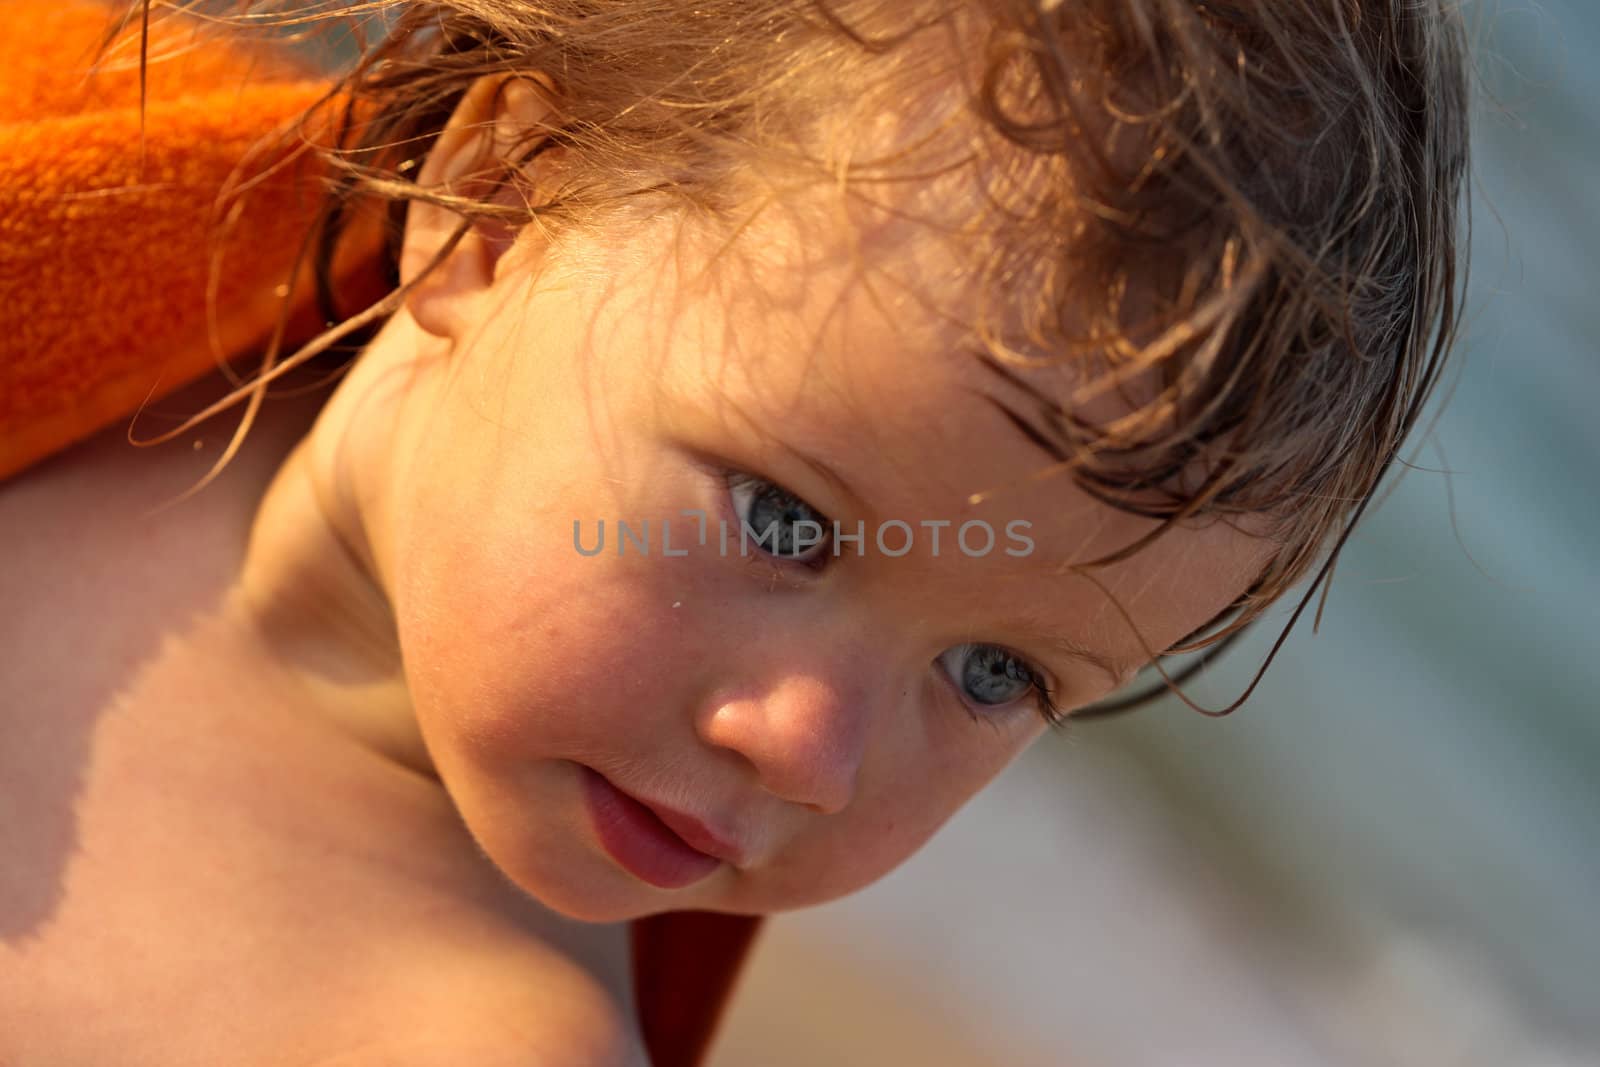 people series: little girl with wet hair portrait